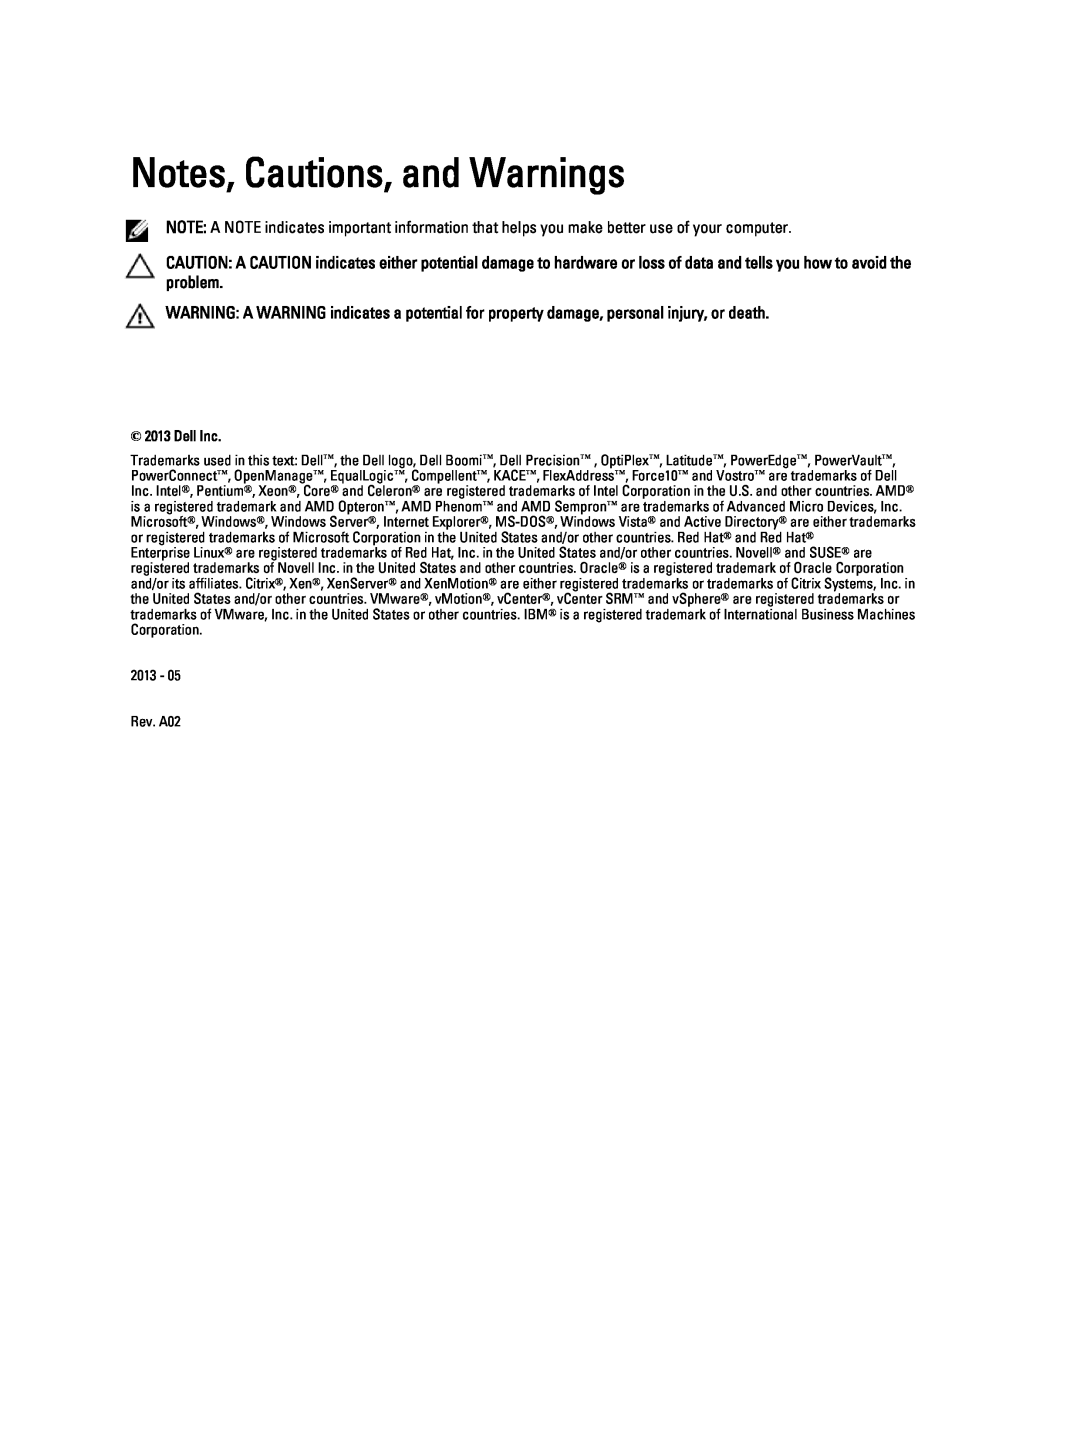 Dell 6430U owner manual Notes, Cautions, and Warnings, Dell Inc 